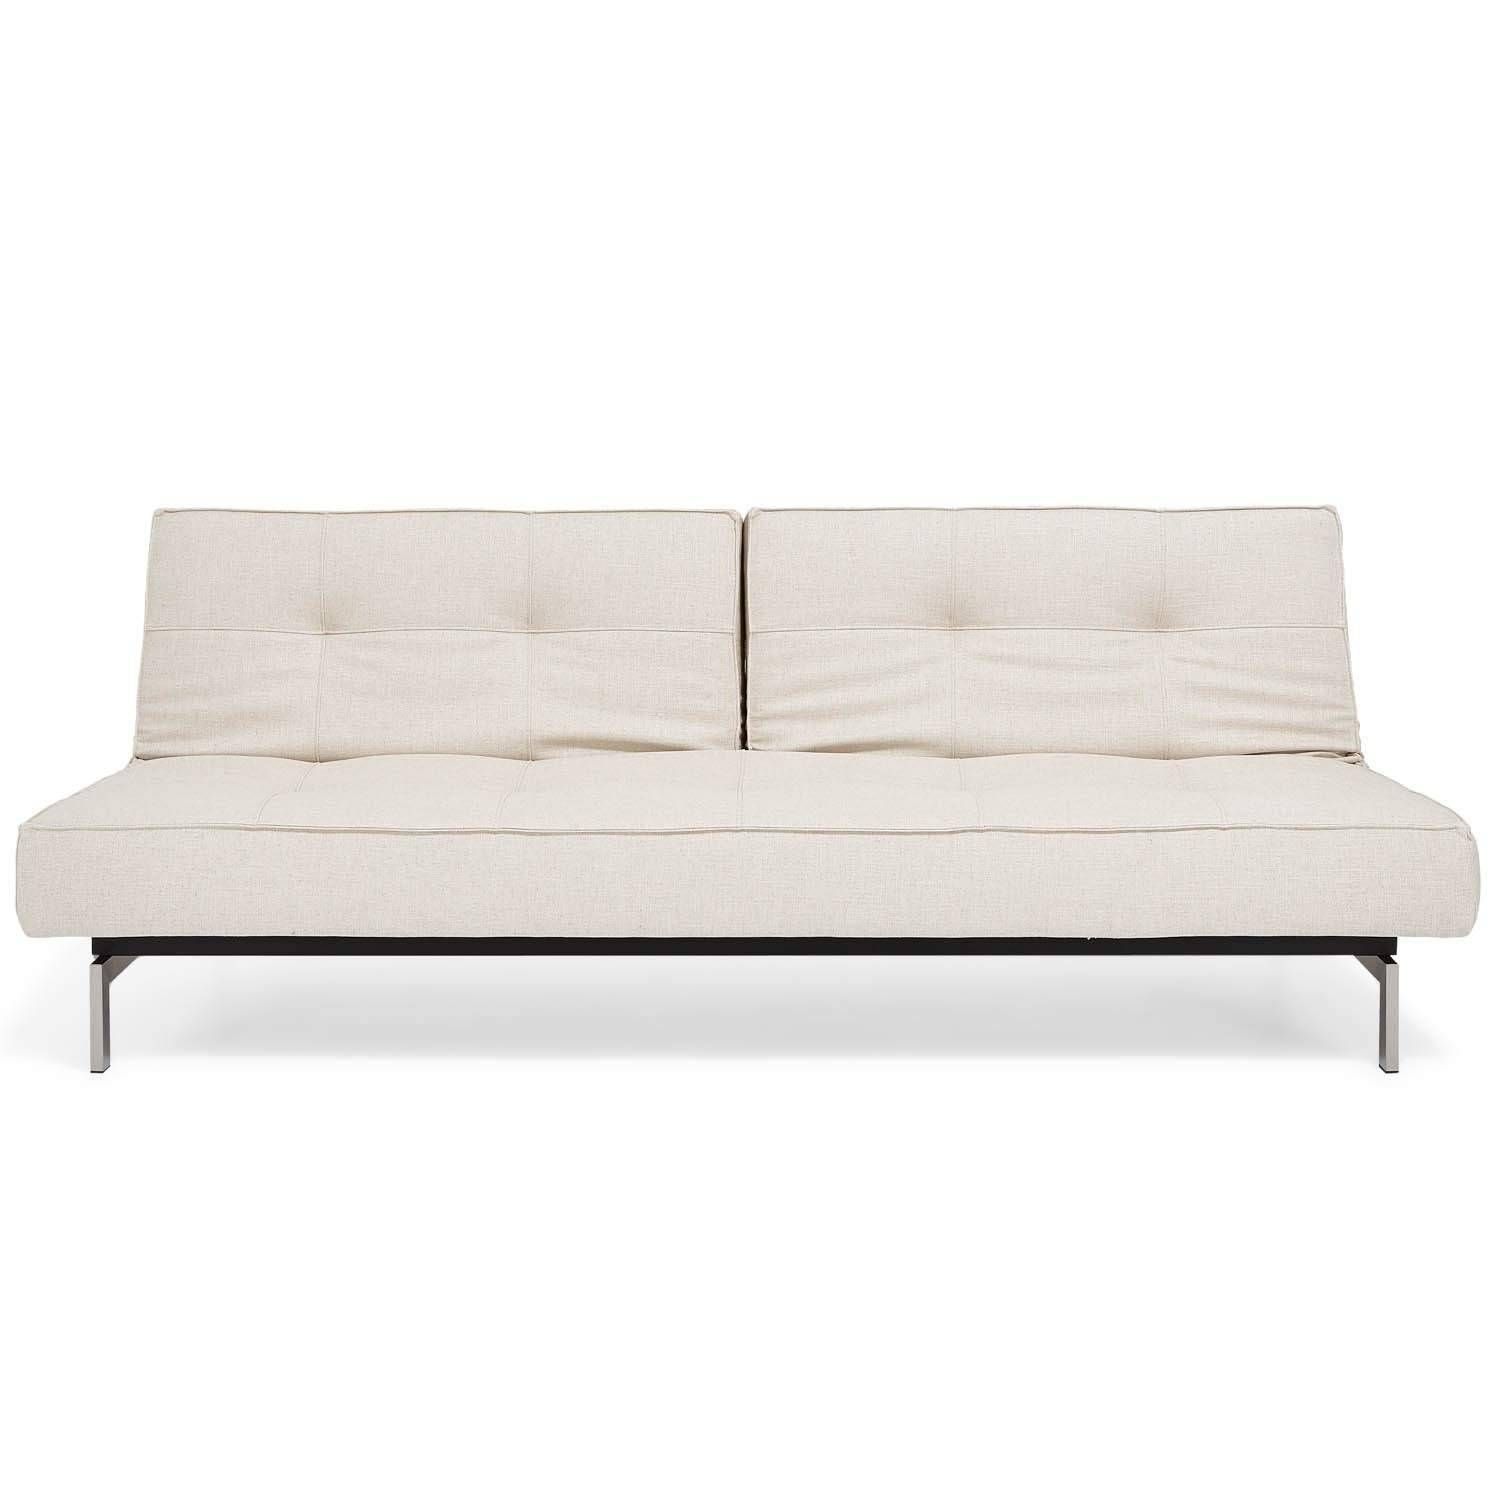 Crashpad Divided Daybed Sofa Off White – Abc Carpet & Home For Sofa Day Beds (View 11 of 30)